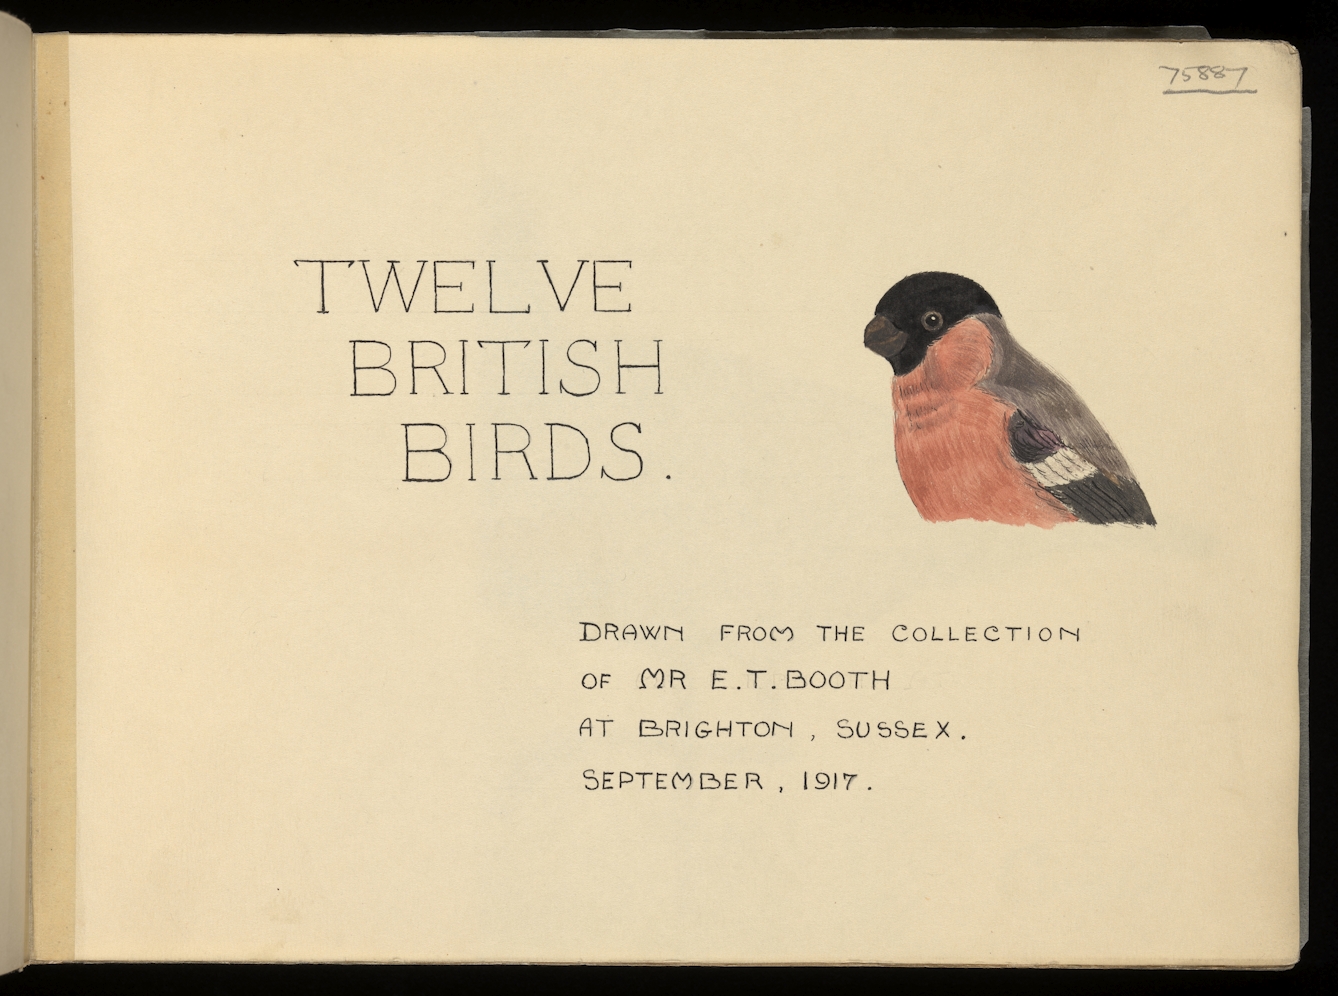 Photograph of a page from a handwritten and illustrated book, titled 'Twelve British birds. Drawn from the Collection of Mr. E. T. Booth at Brighton, Sussex. September 1917'. The image shows the main title page along with a watercolour painting of a small bird with a red chest, black cap, grey wings with a fleck of white.